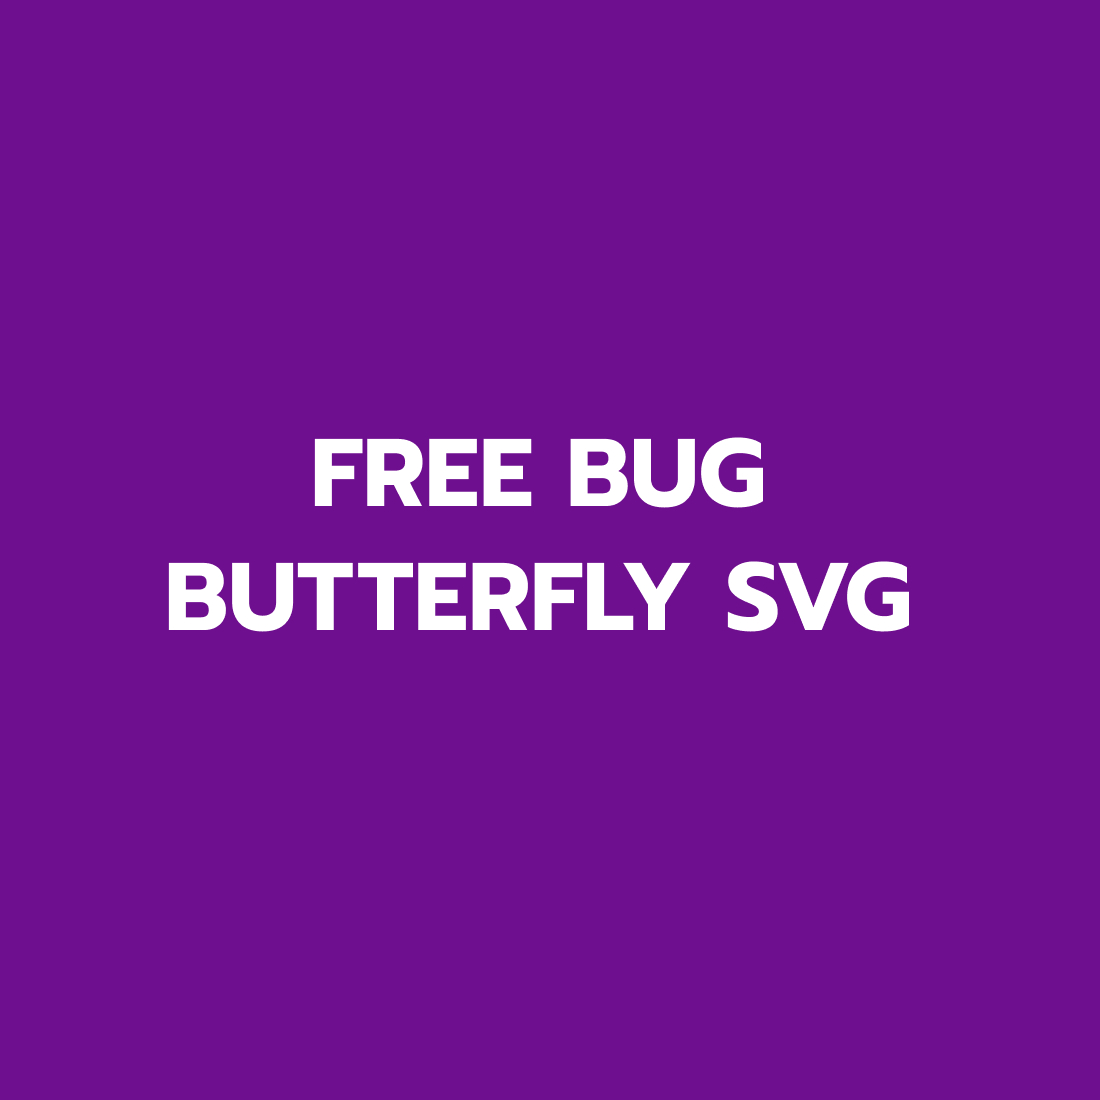 Free Bug Butterfly SVG cover image.